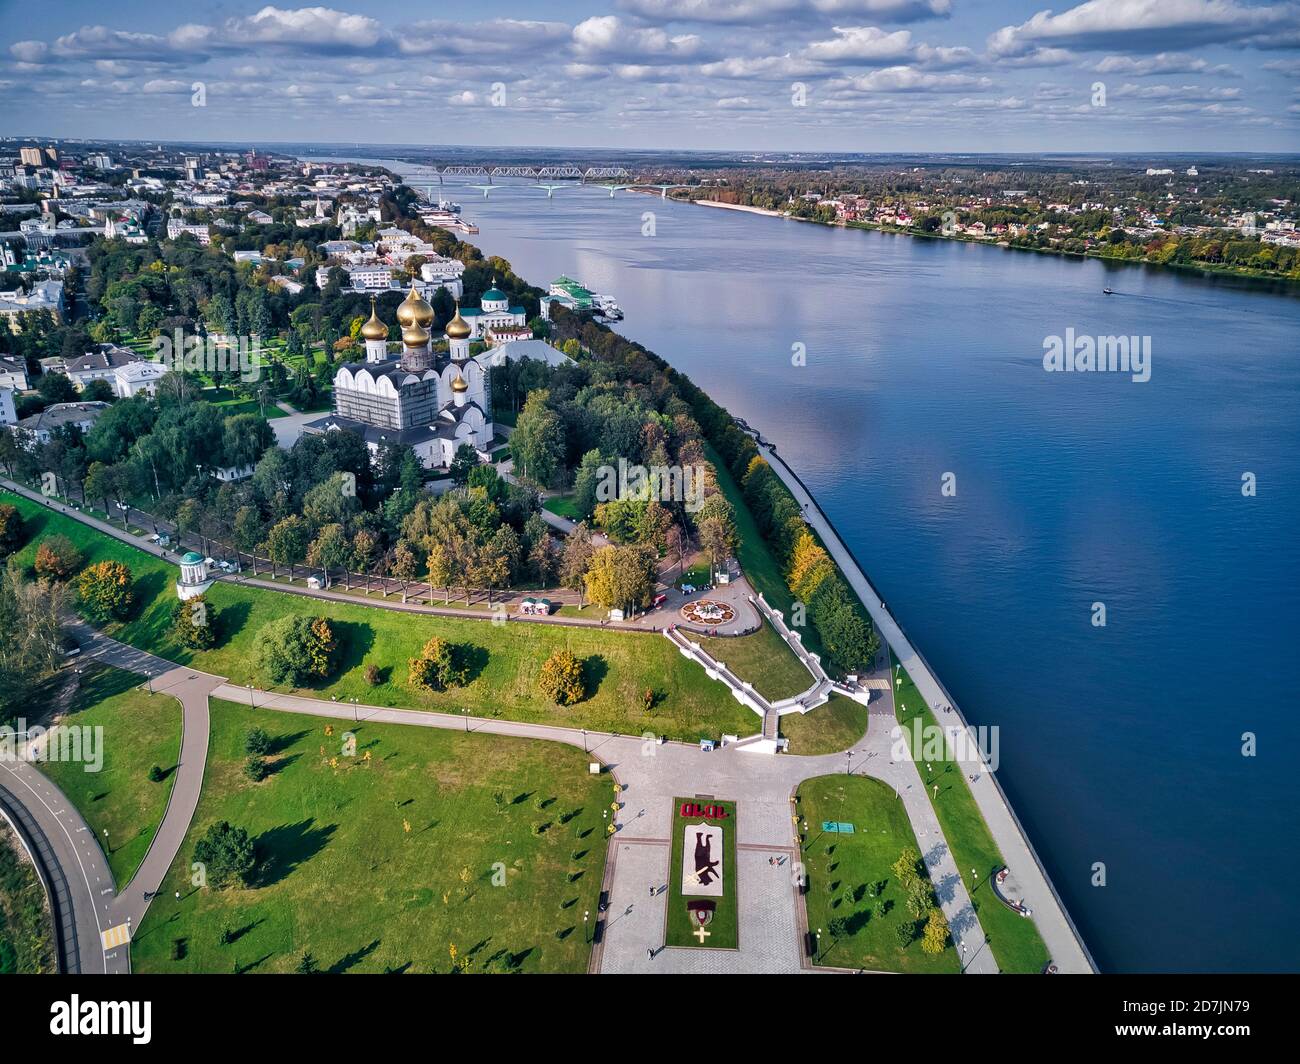 Aerial view of park at Strelka and Assumption Cathedral by Volga River in city, Yaroslavl, Russia Stock Photo